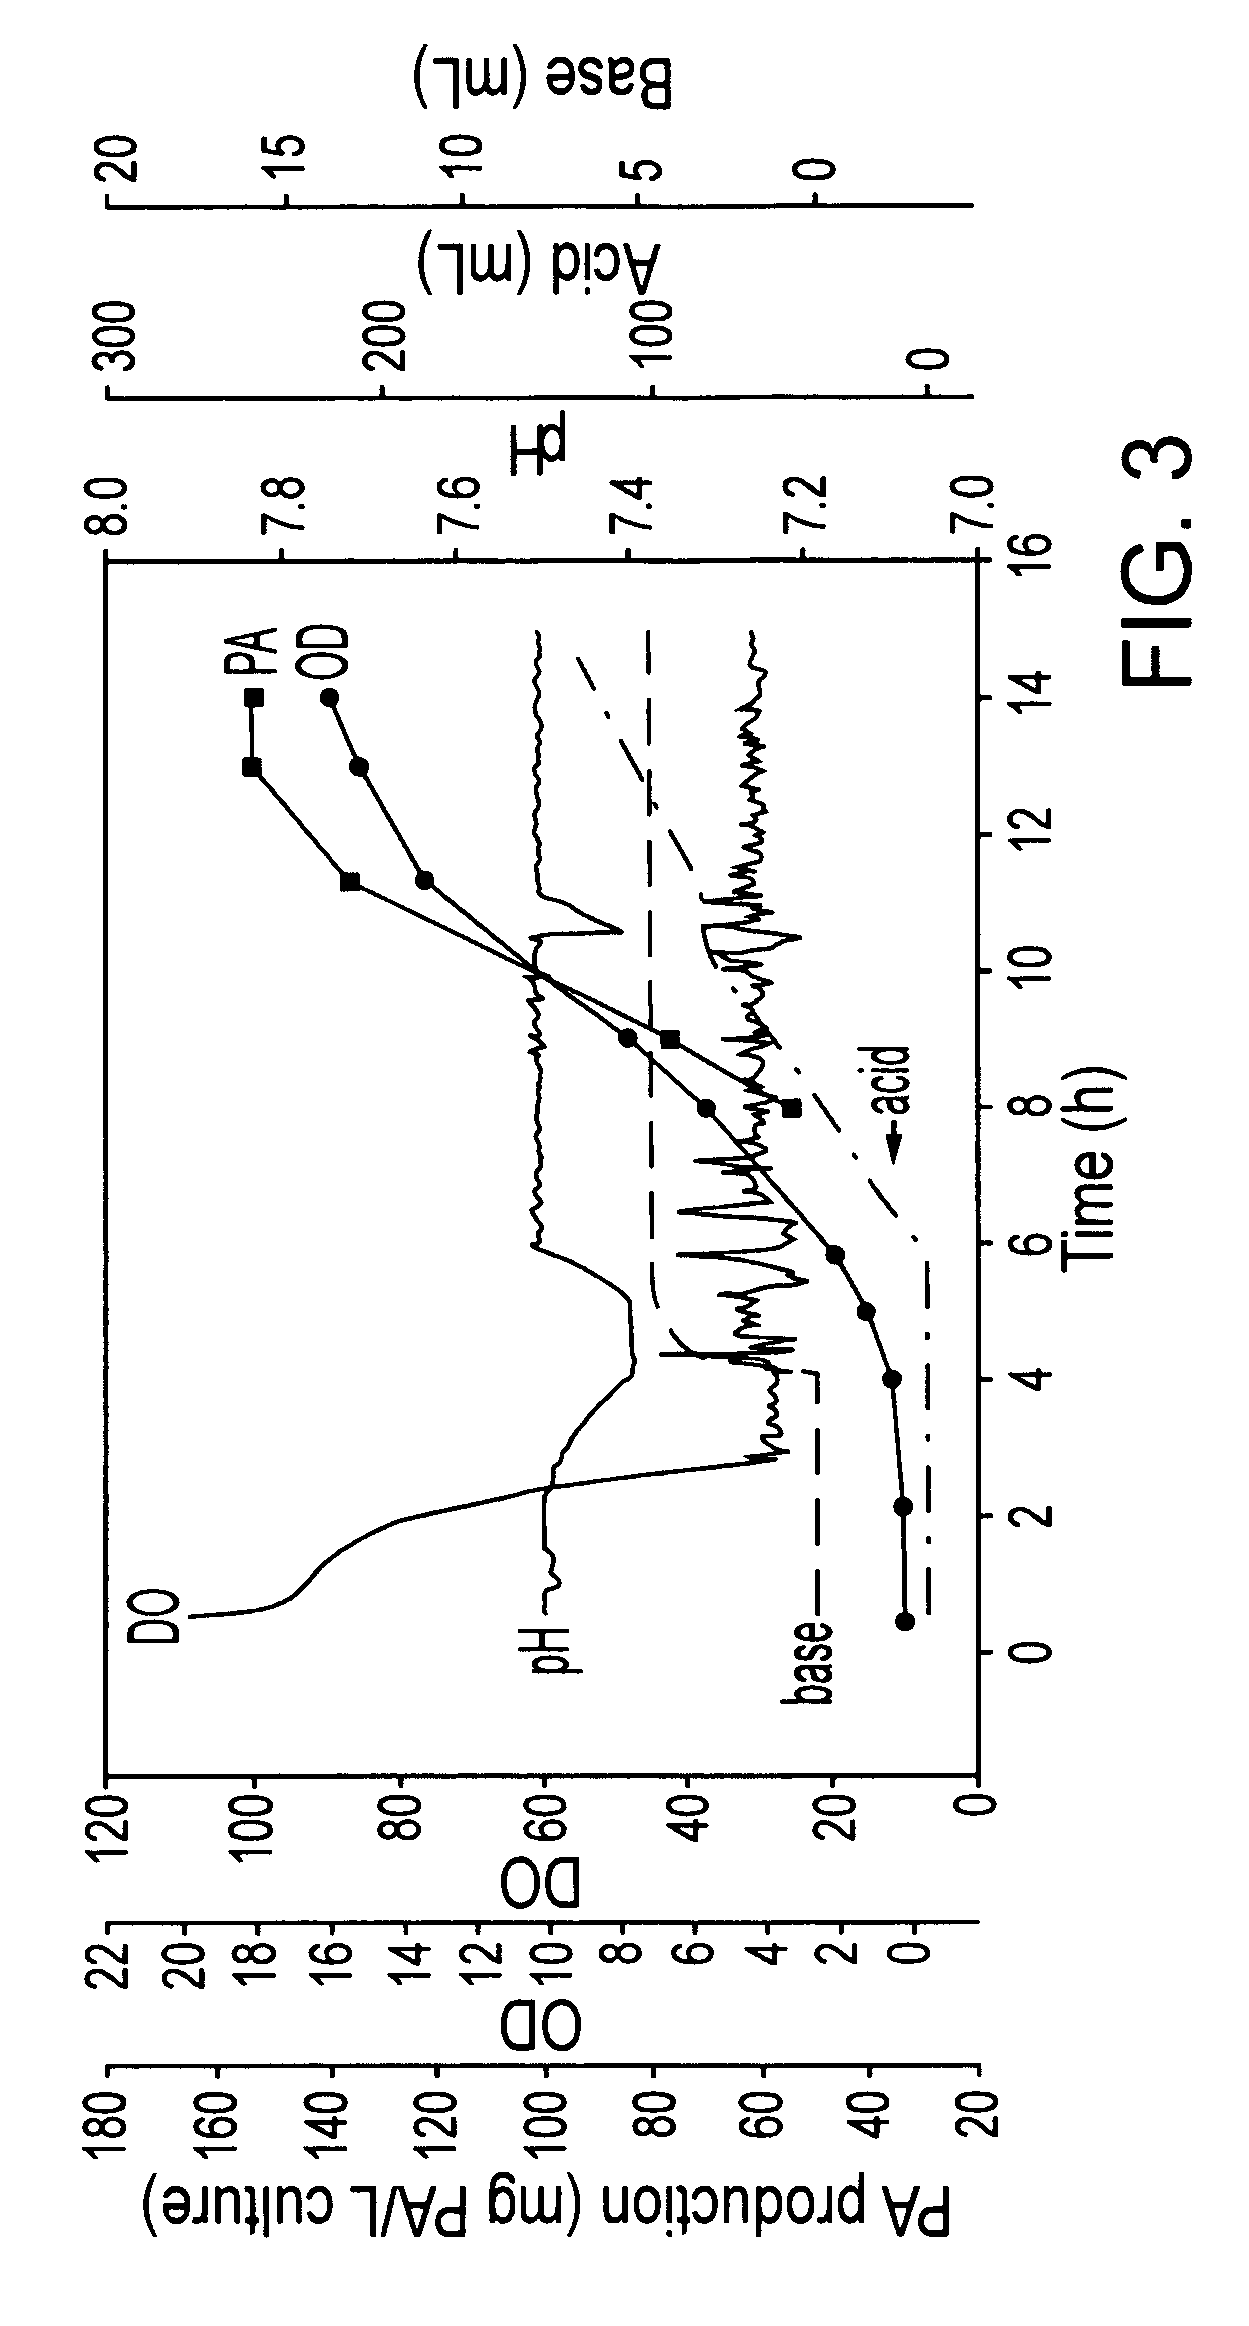 Methods for preparing Bacillus anthracis protective antigen for use in vaccines